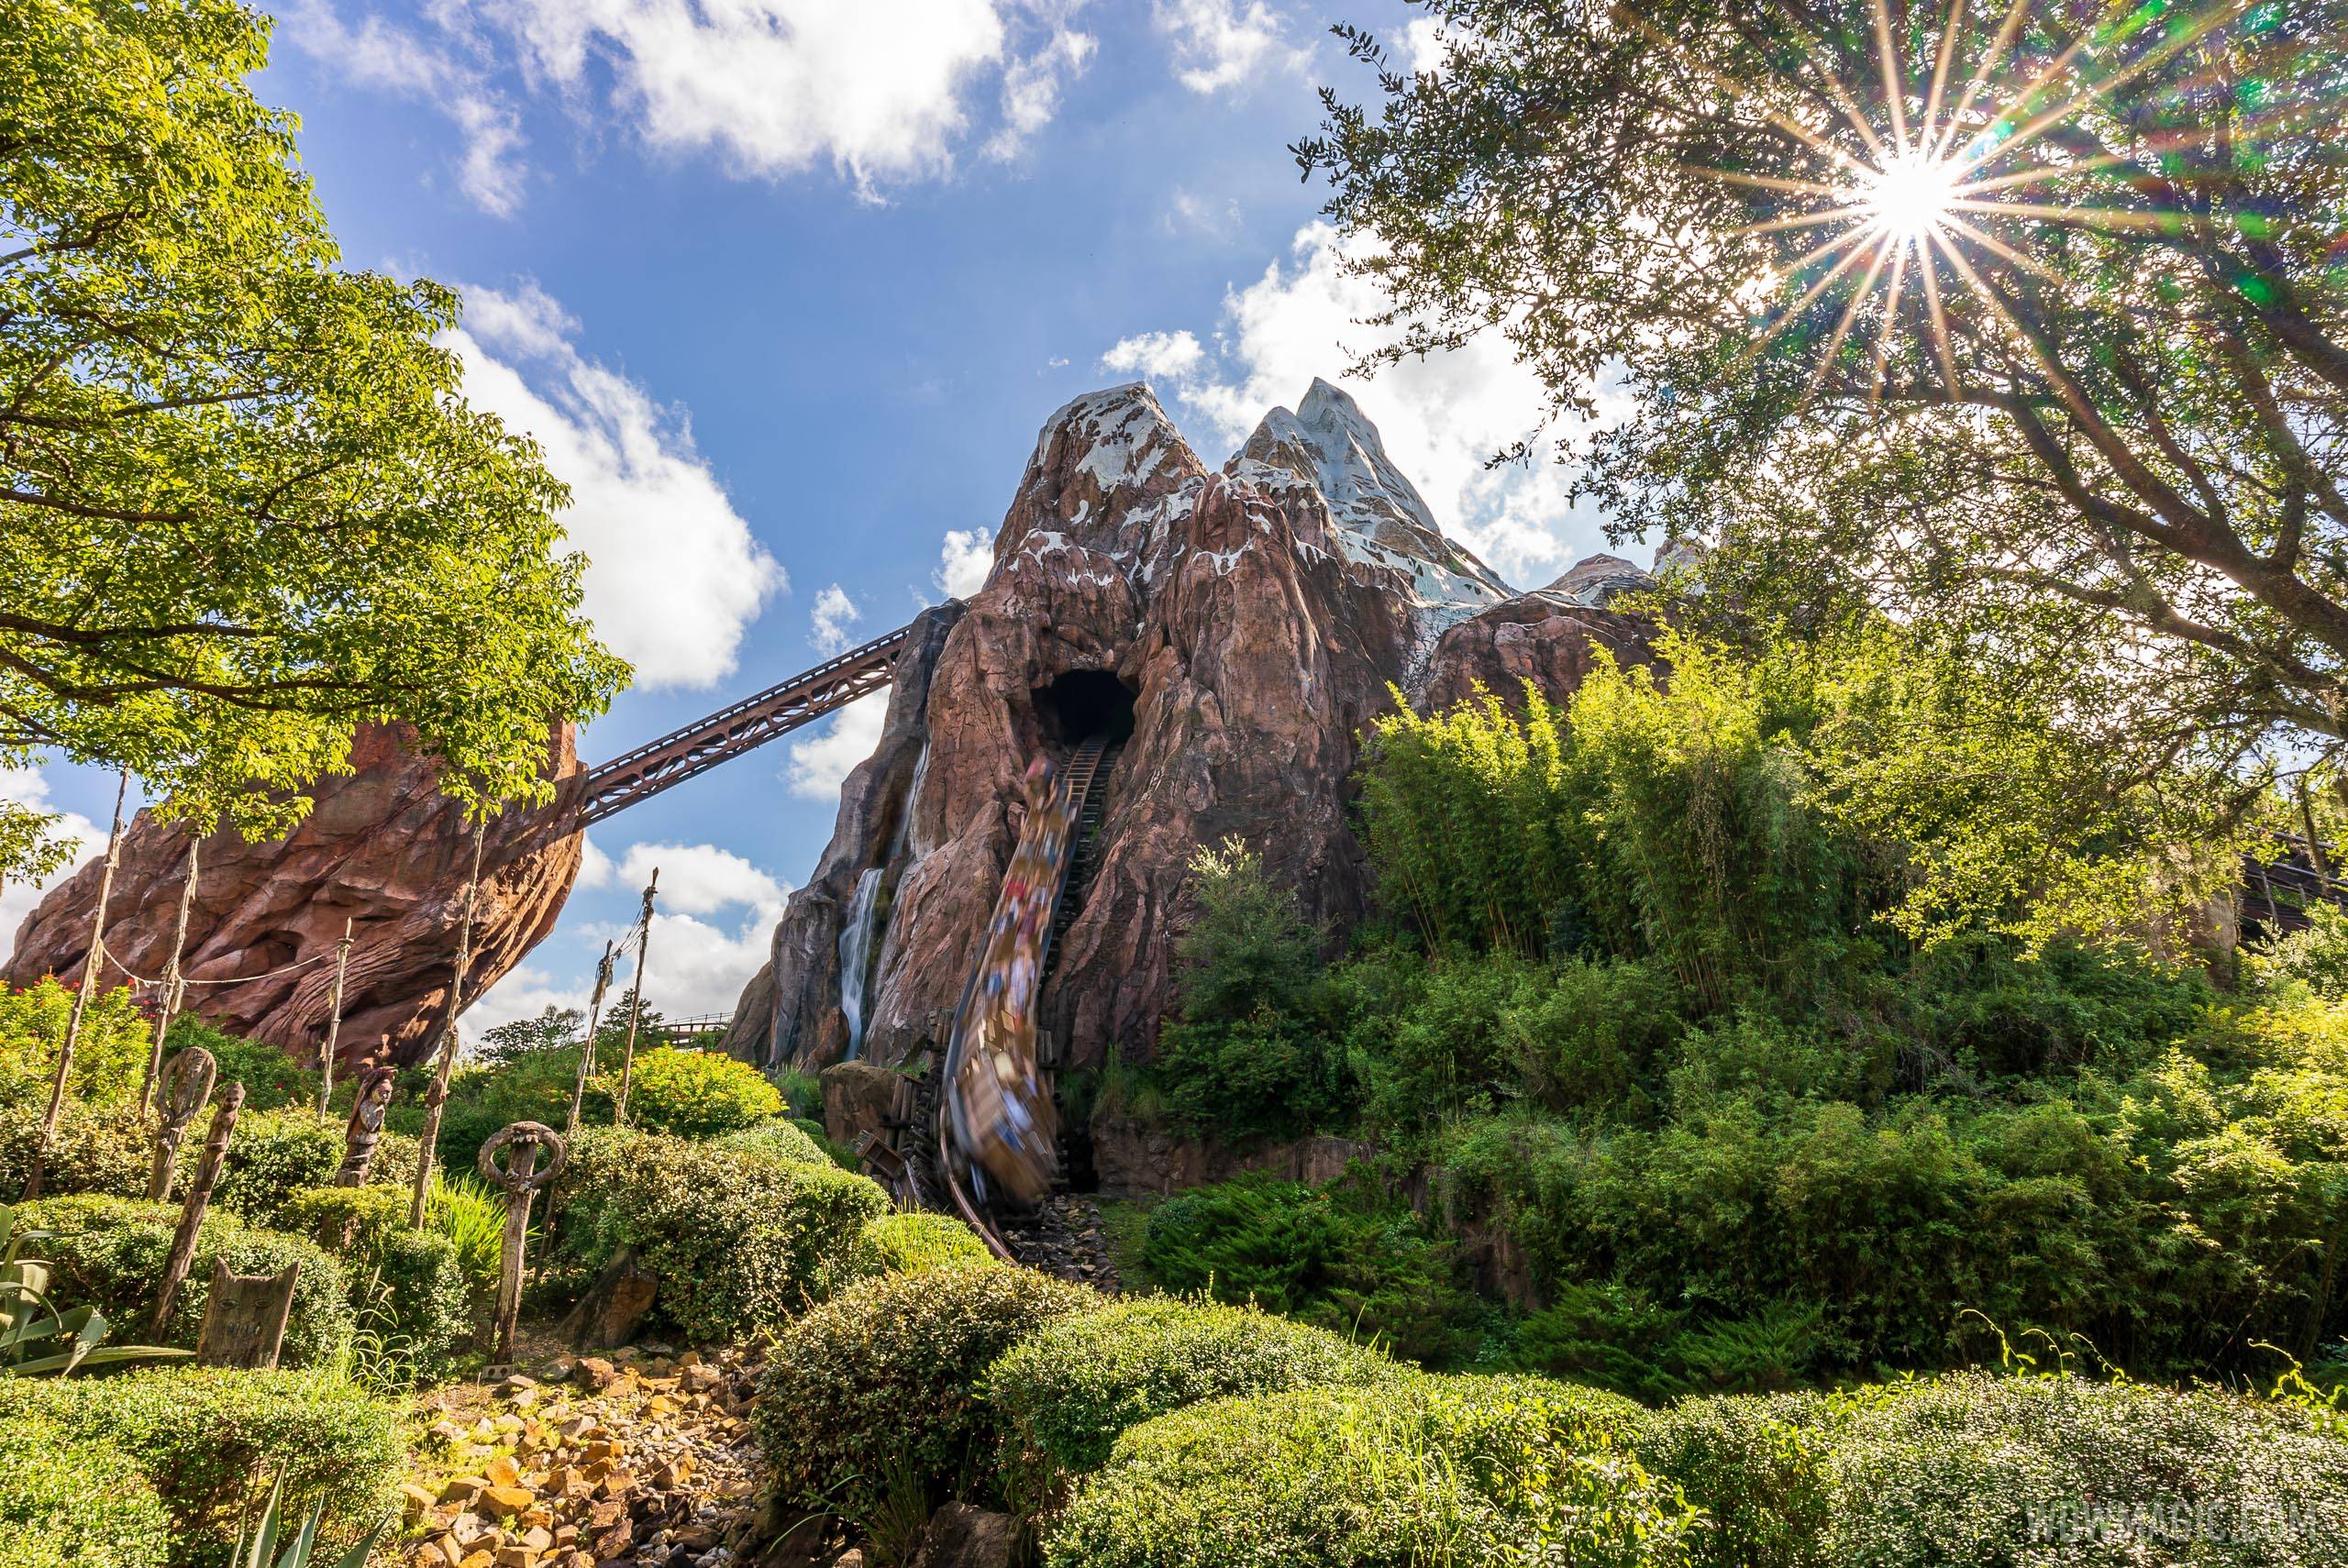 Expedition Everest is one of the attractions that will be available during the event